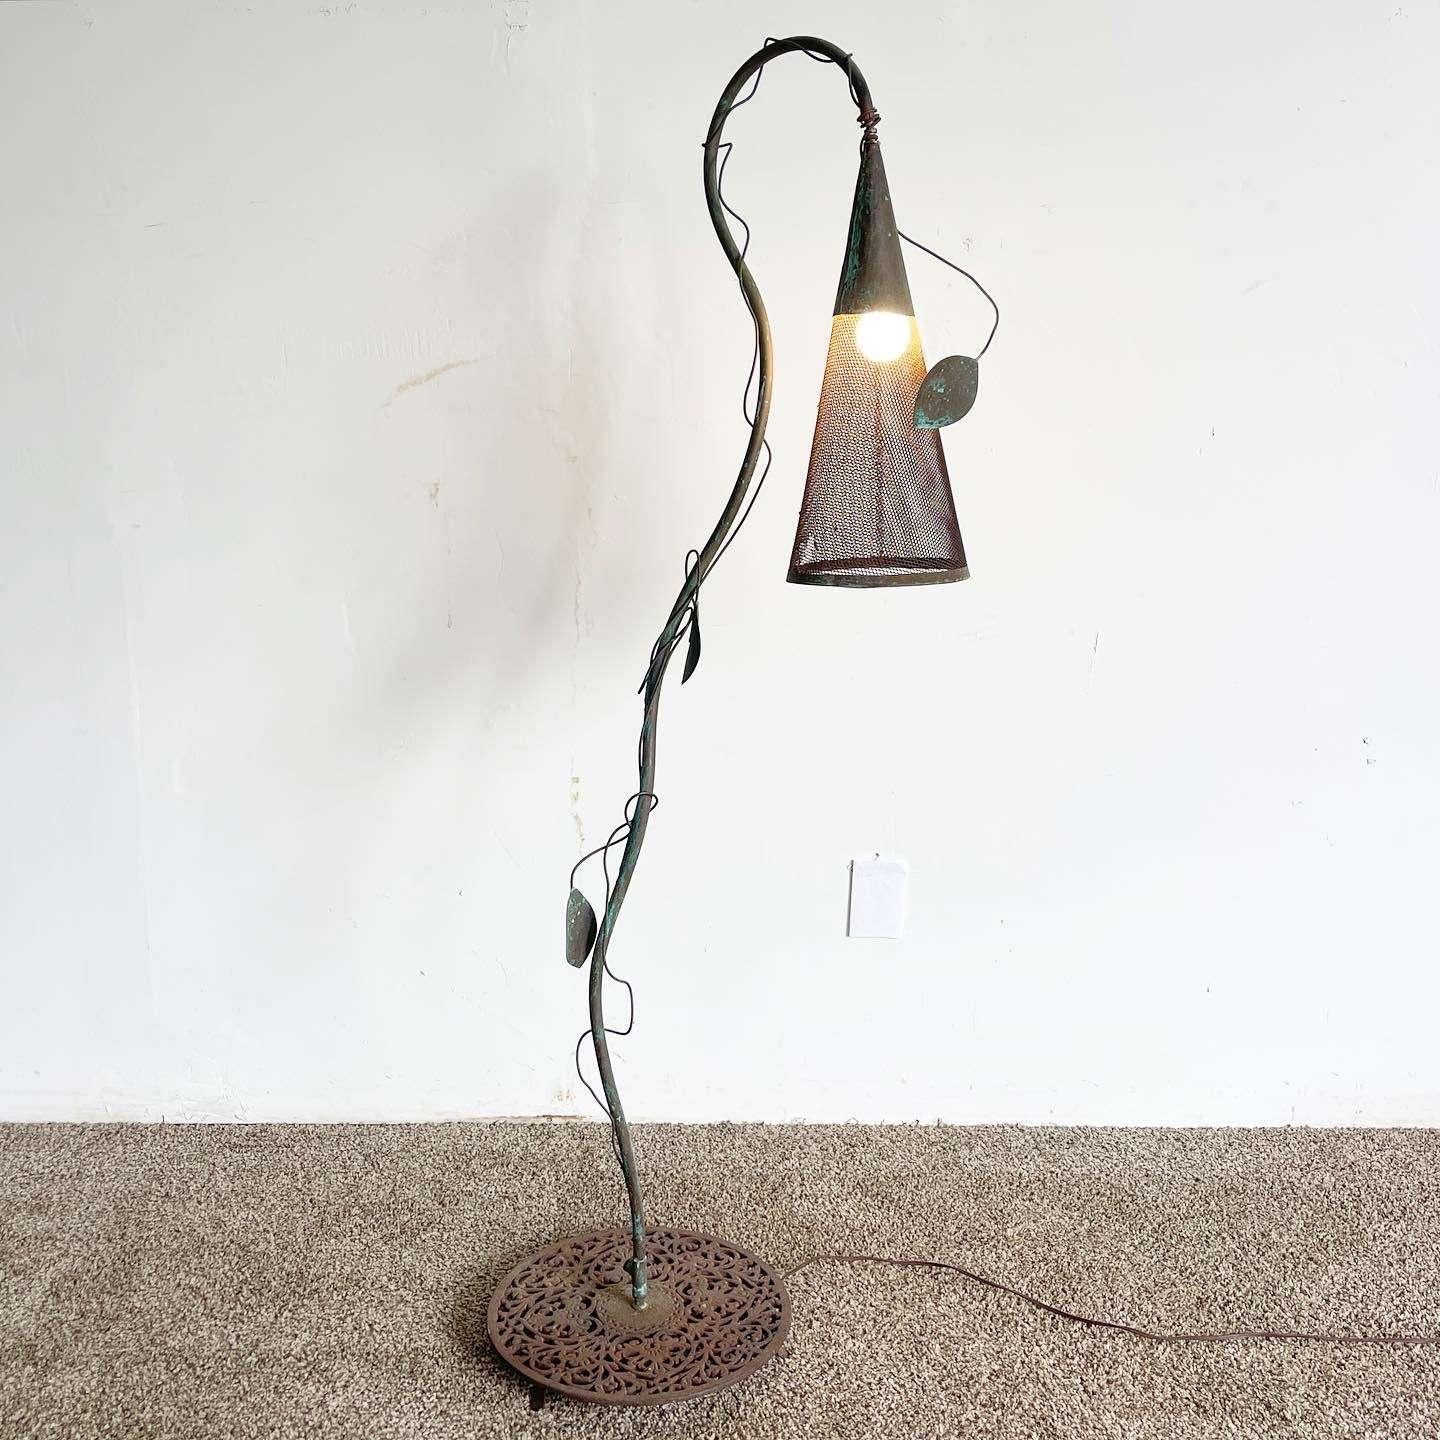 Incredible vintage hand made iron floor lamp. Shade is a metal sheep making a cone around the light which hangs from the stem which has a sculpted vine.